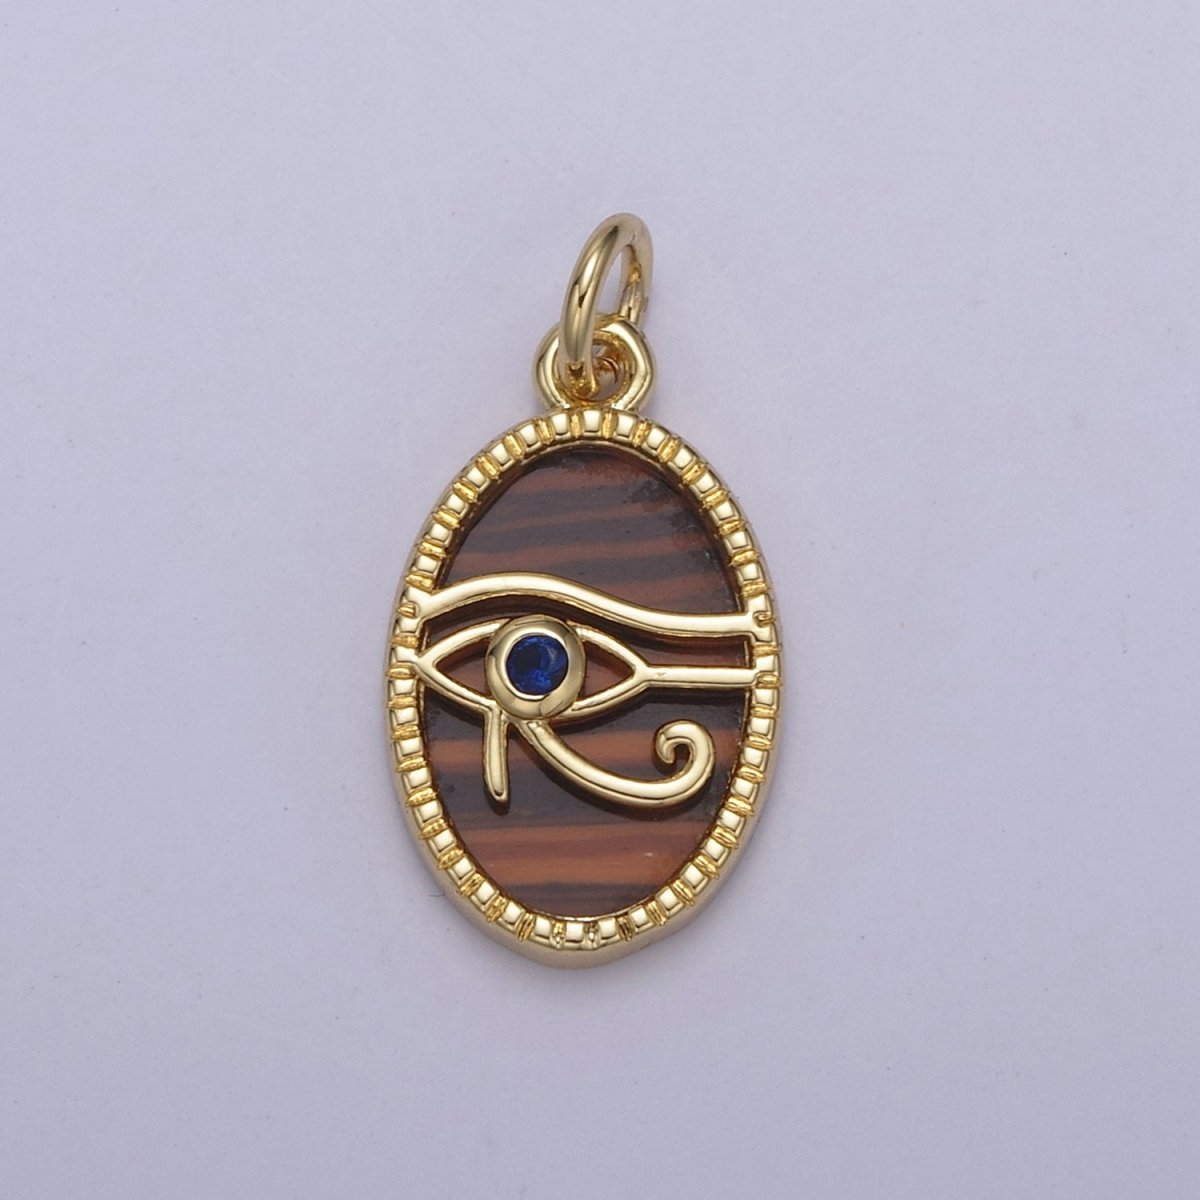 14K Gold Filled Pearl, Tiger Eye, Abalone Shell Charm Pendant Eye Of Ra Charm for Amulet Green Necklace Bracelet Jewelry Making N-771 - N-773 - DLUXCA